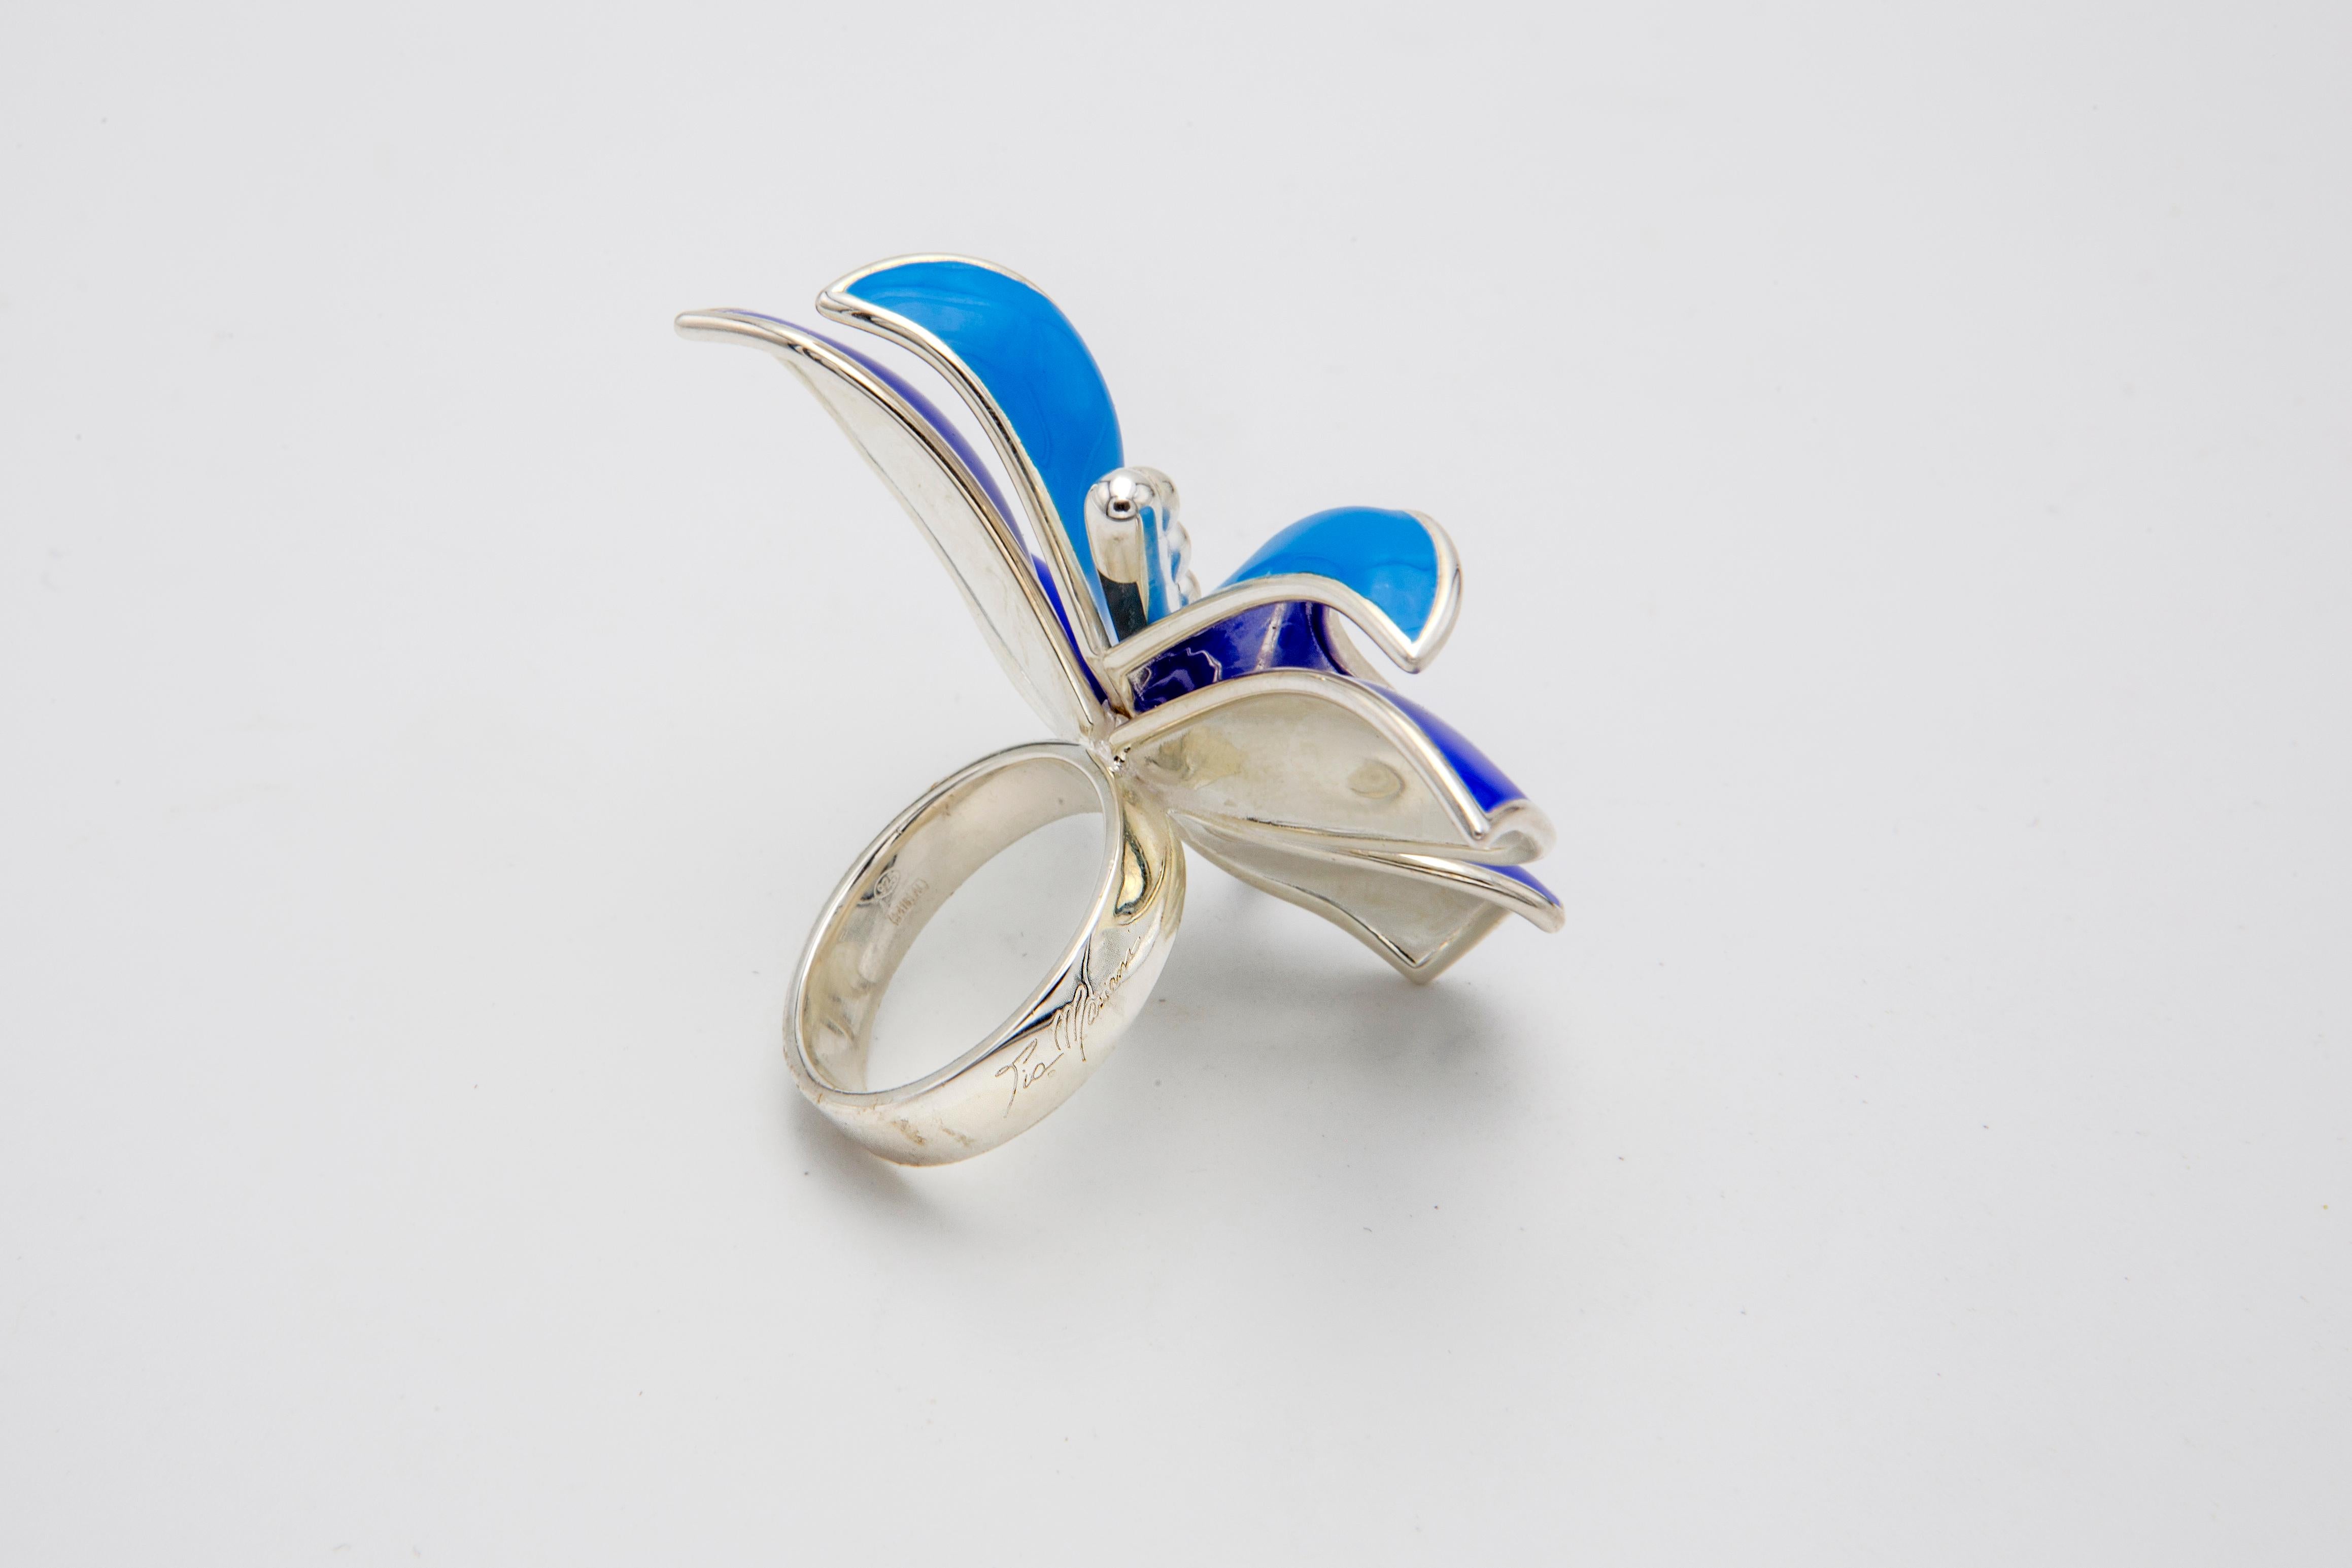 For Sale:  Six Wings 925 Silver Ring Big Butterfly Aurora with Blue and Light Blue Enamel 2